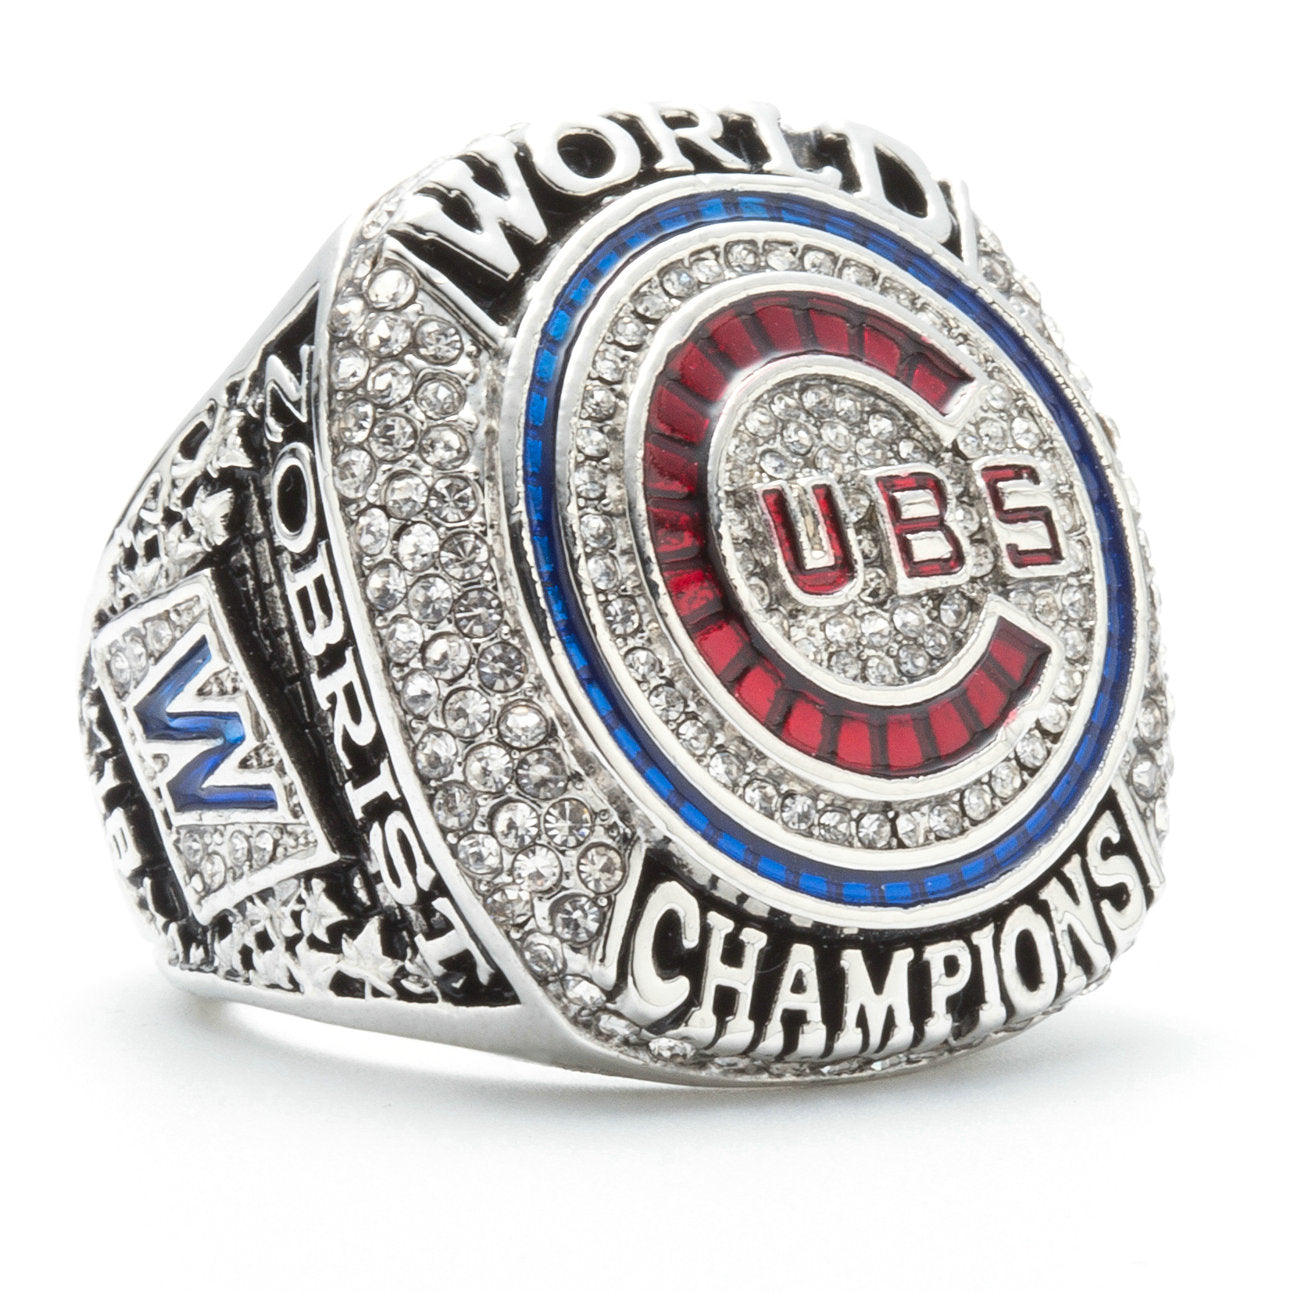 Chicago Cubs 2016 World Series Champions Commemorative Pin Set #2 - Limited  to 5,000 made